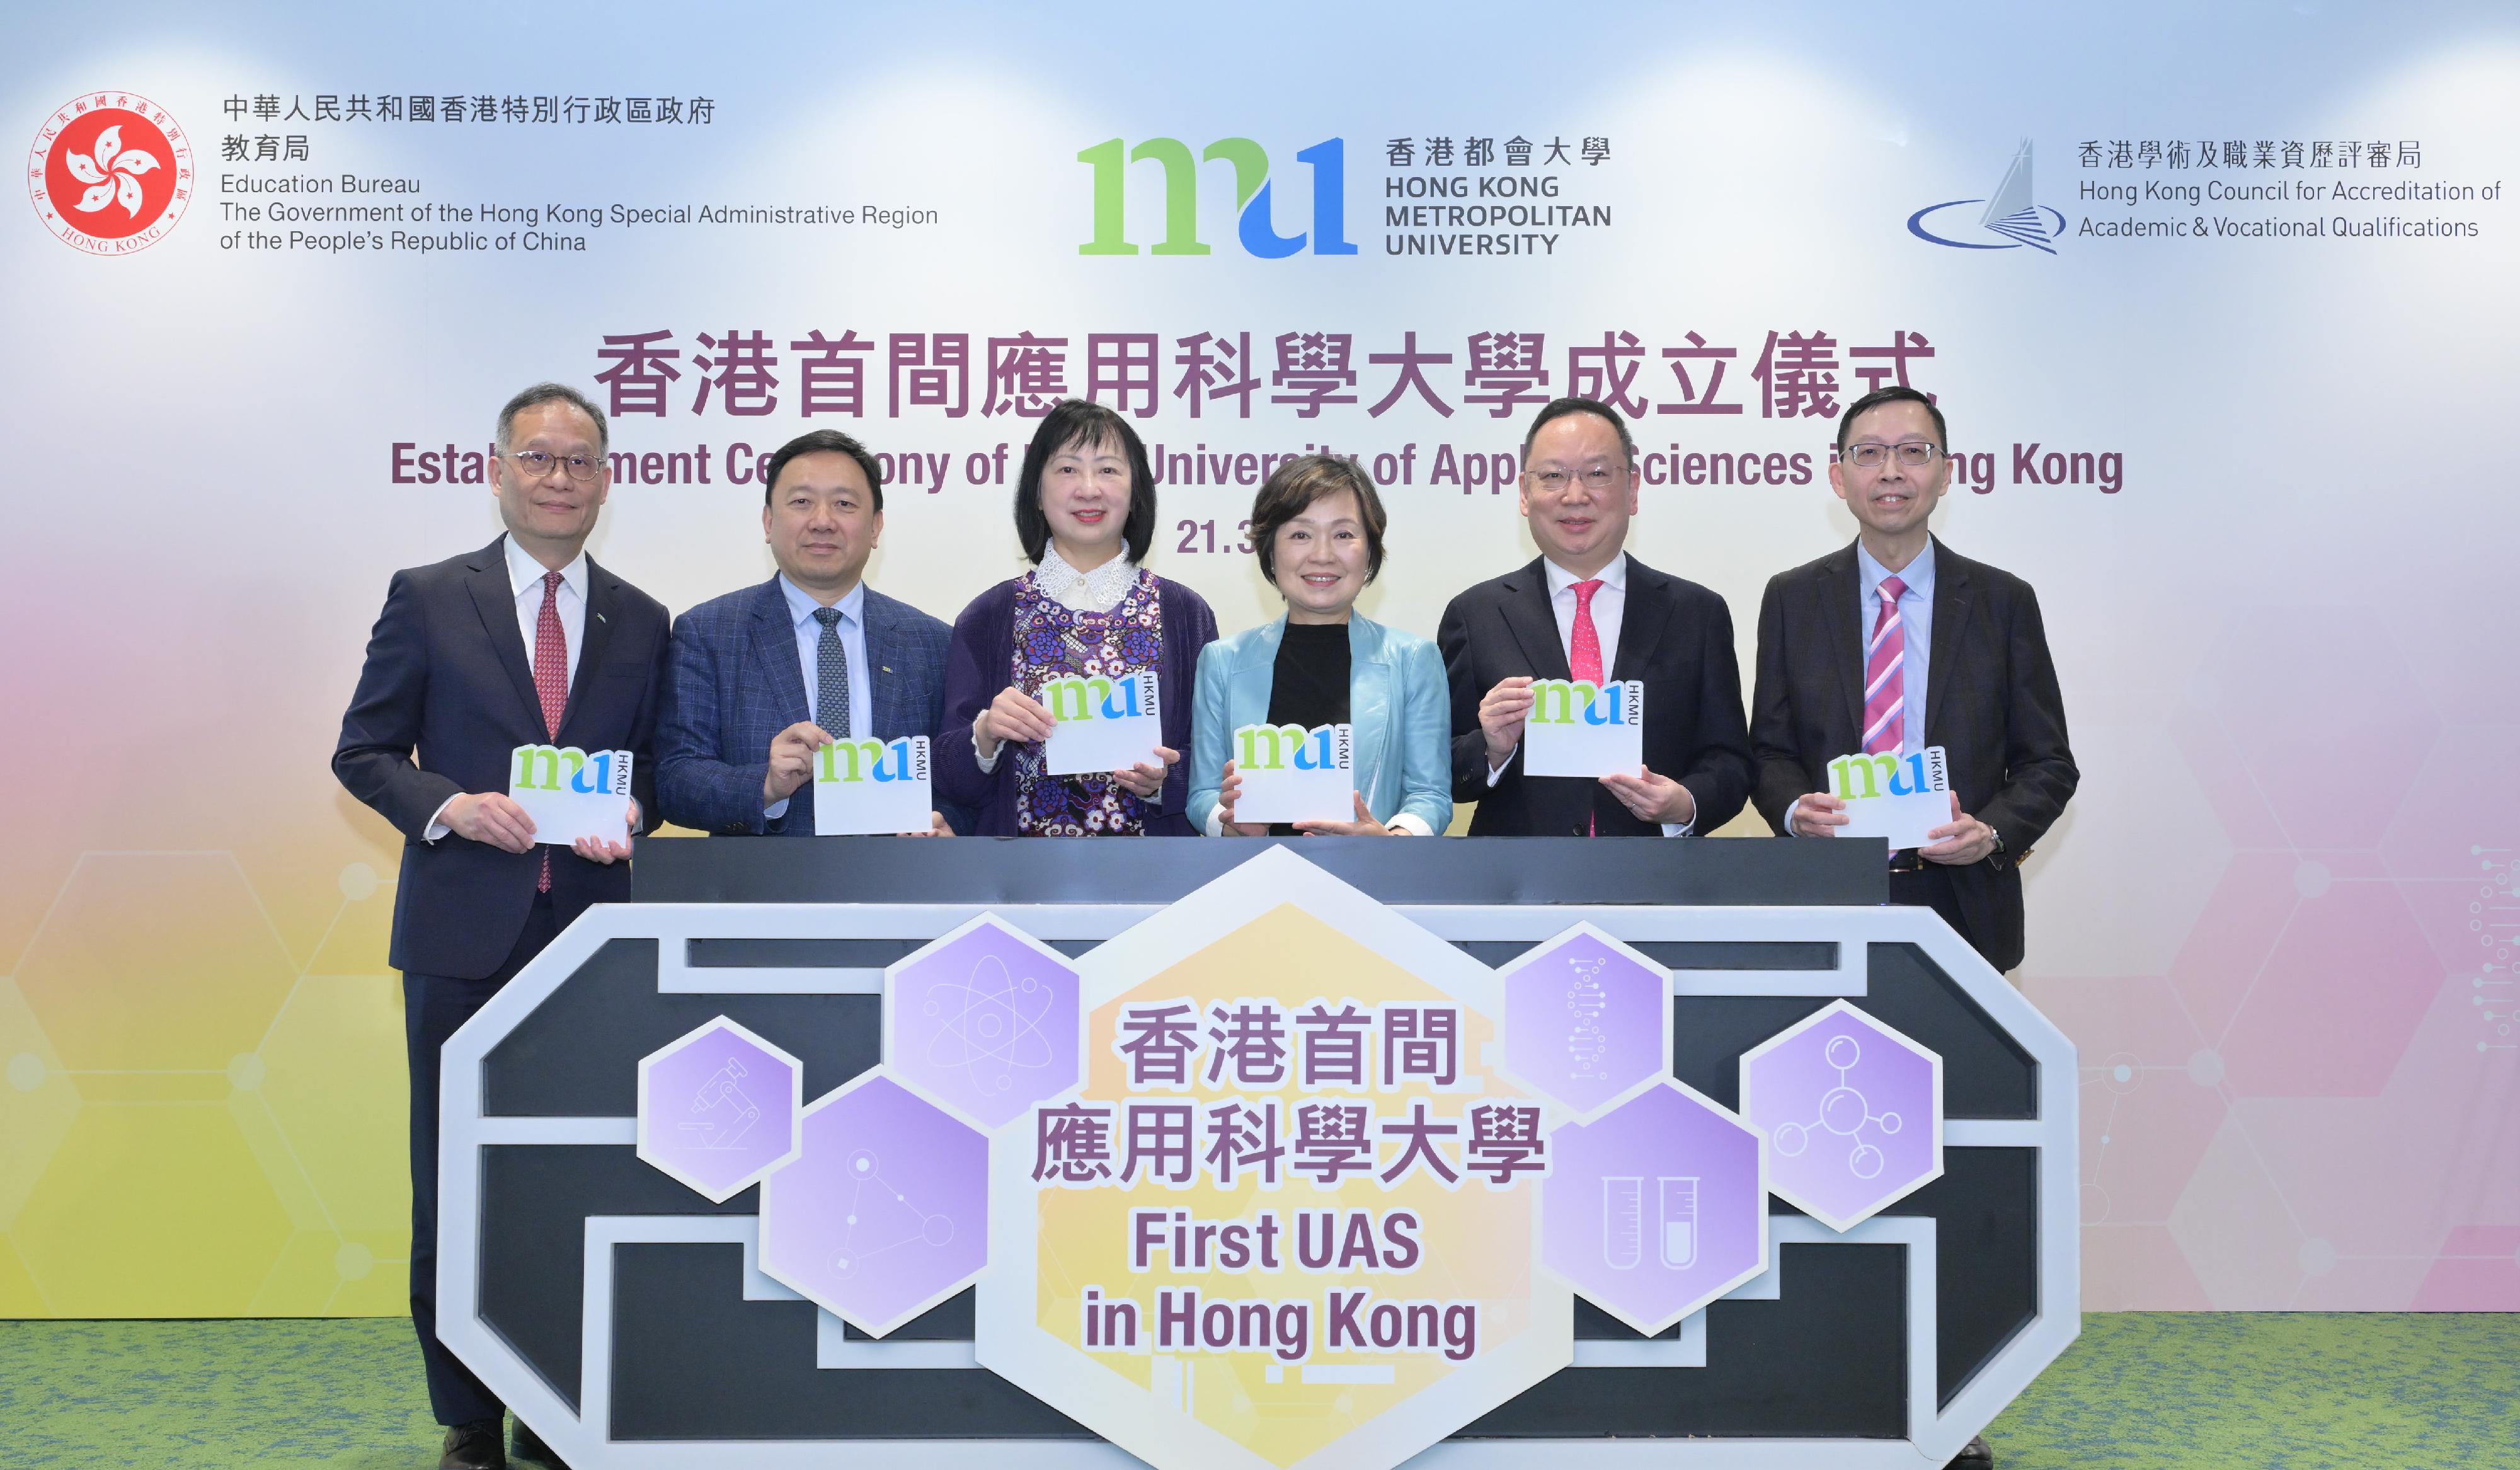 The Education Bureau announced today (March 21) that the Hong Kong Metropolitan University has become the first university of applied sciences in Hong Kong. Photo shows the Secretary for Education, Dr Choi Yuk-lin (third right); the Permanent Secretary for Education, Ms Michelle Li (third left); the Council Chairman of the Hong Kong Metropolitan University, Dr Conrad Wong (second left); the President of the Hong Kong Metropolitan University, Professor Paul Lam (first left); the Chairman of the Hong Kong Council for Accreditation of Academic and Vocational Qualifications, Mr Rock Chen (second right); and the Executive Director of the Hong Kong Council for Accreditation of Academic and Vocational Qualifications, Mr Albert Chow (first right), officiating at the ceremony.  